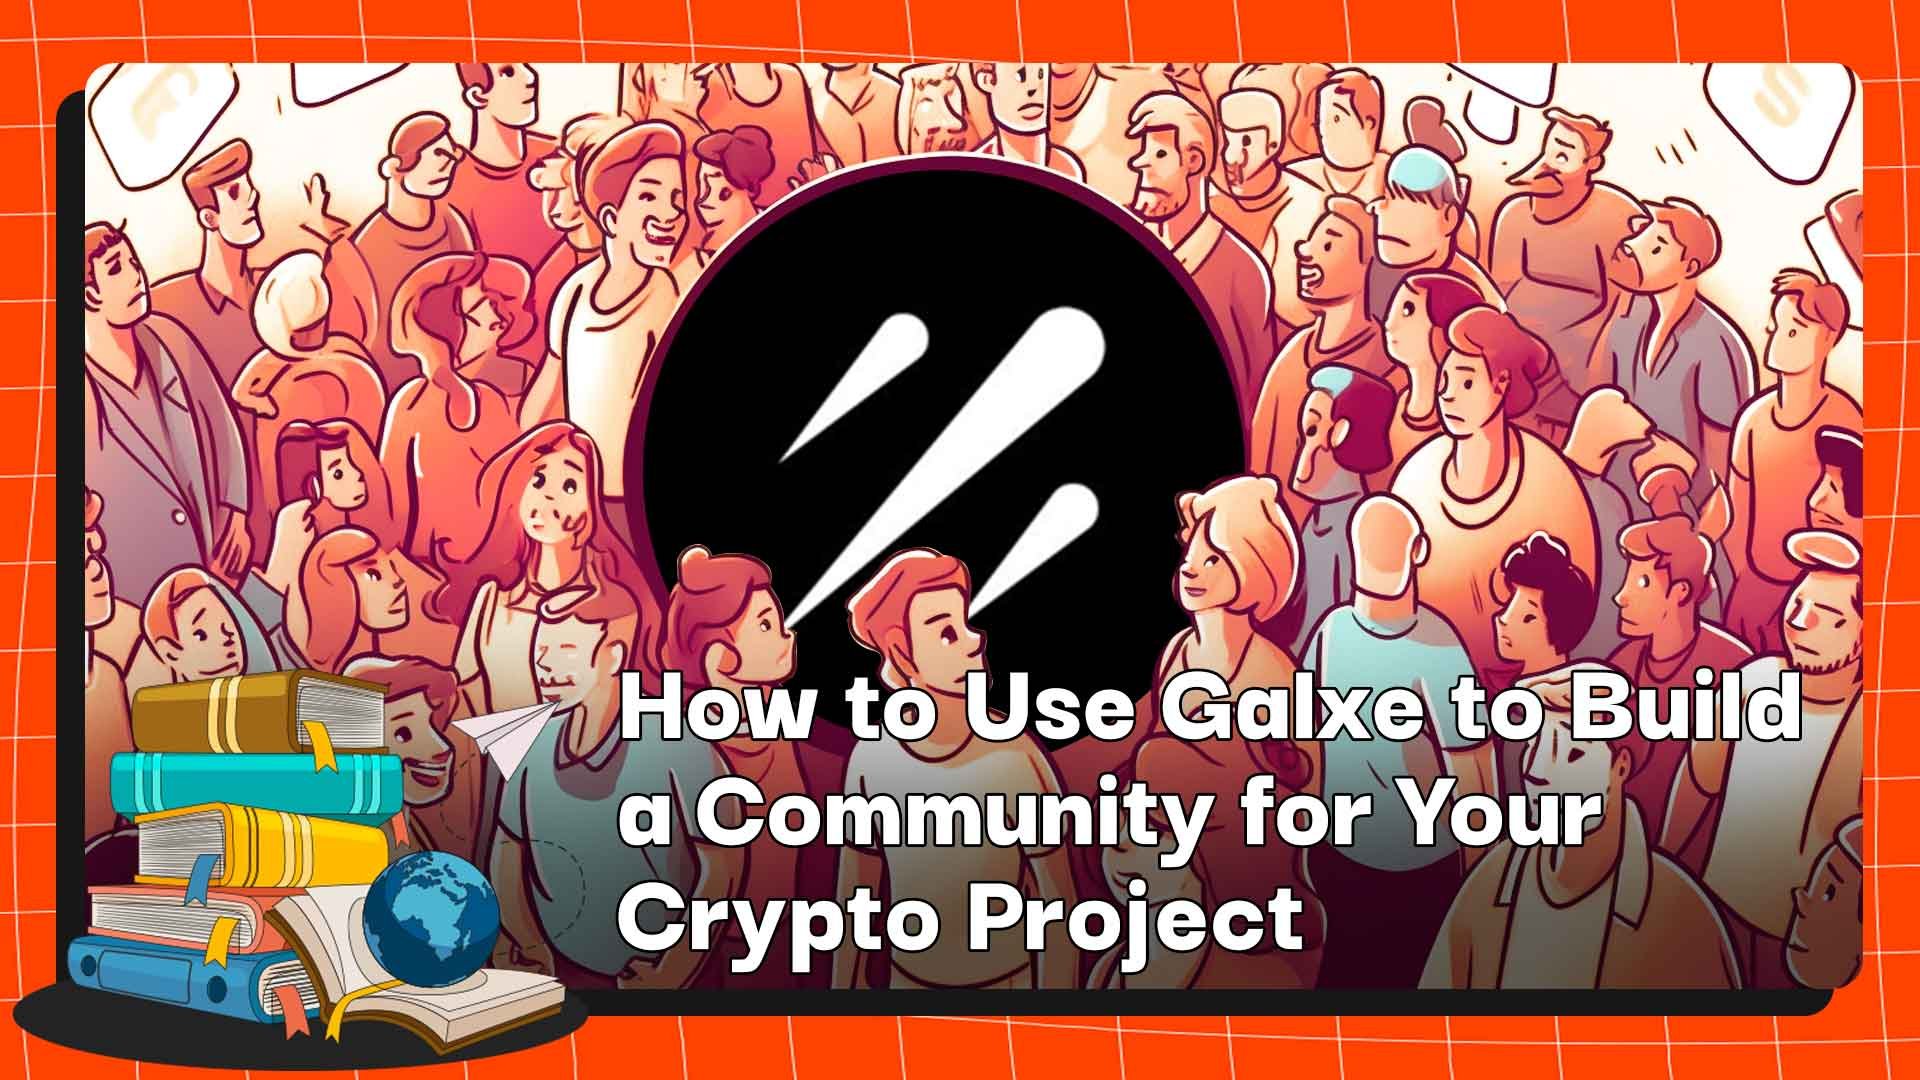 In the center is Galxe and do you know how to use this platform to build a strong community for your crypto project?